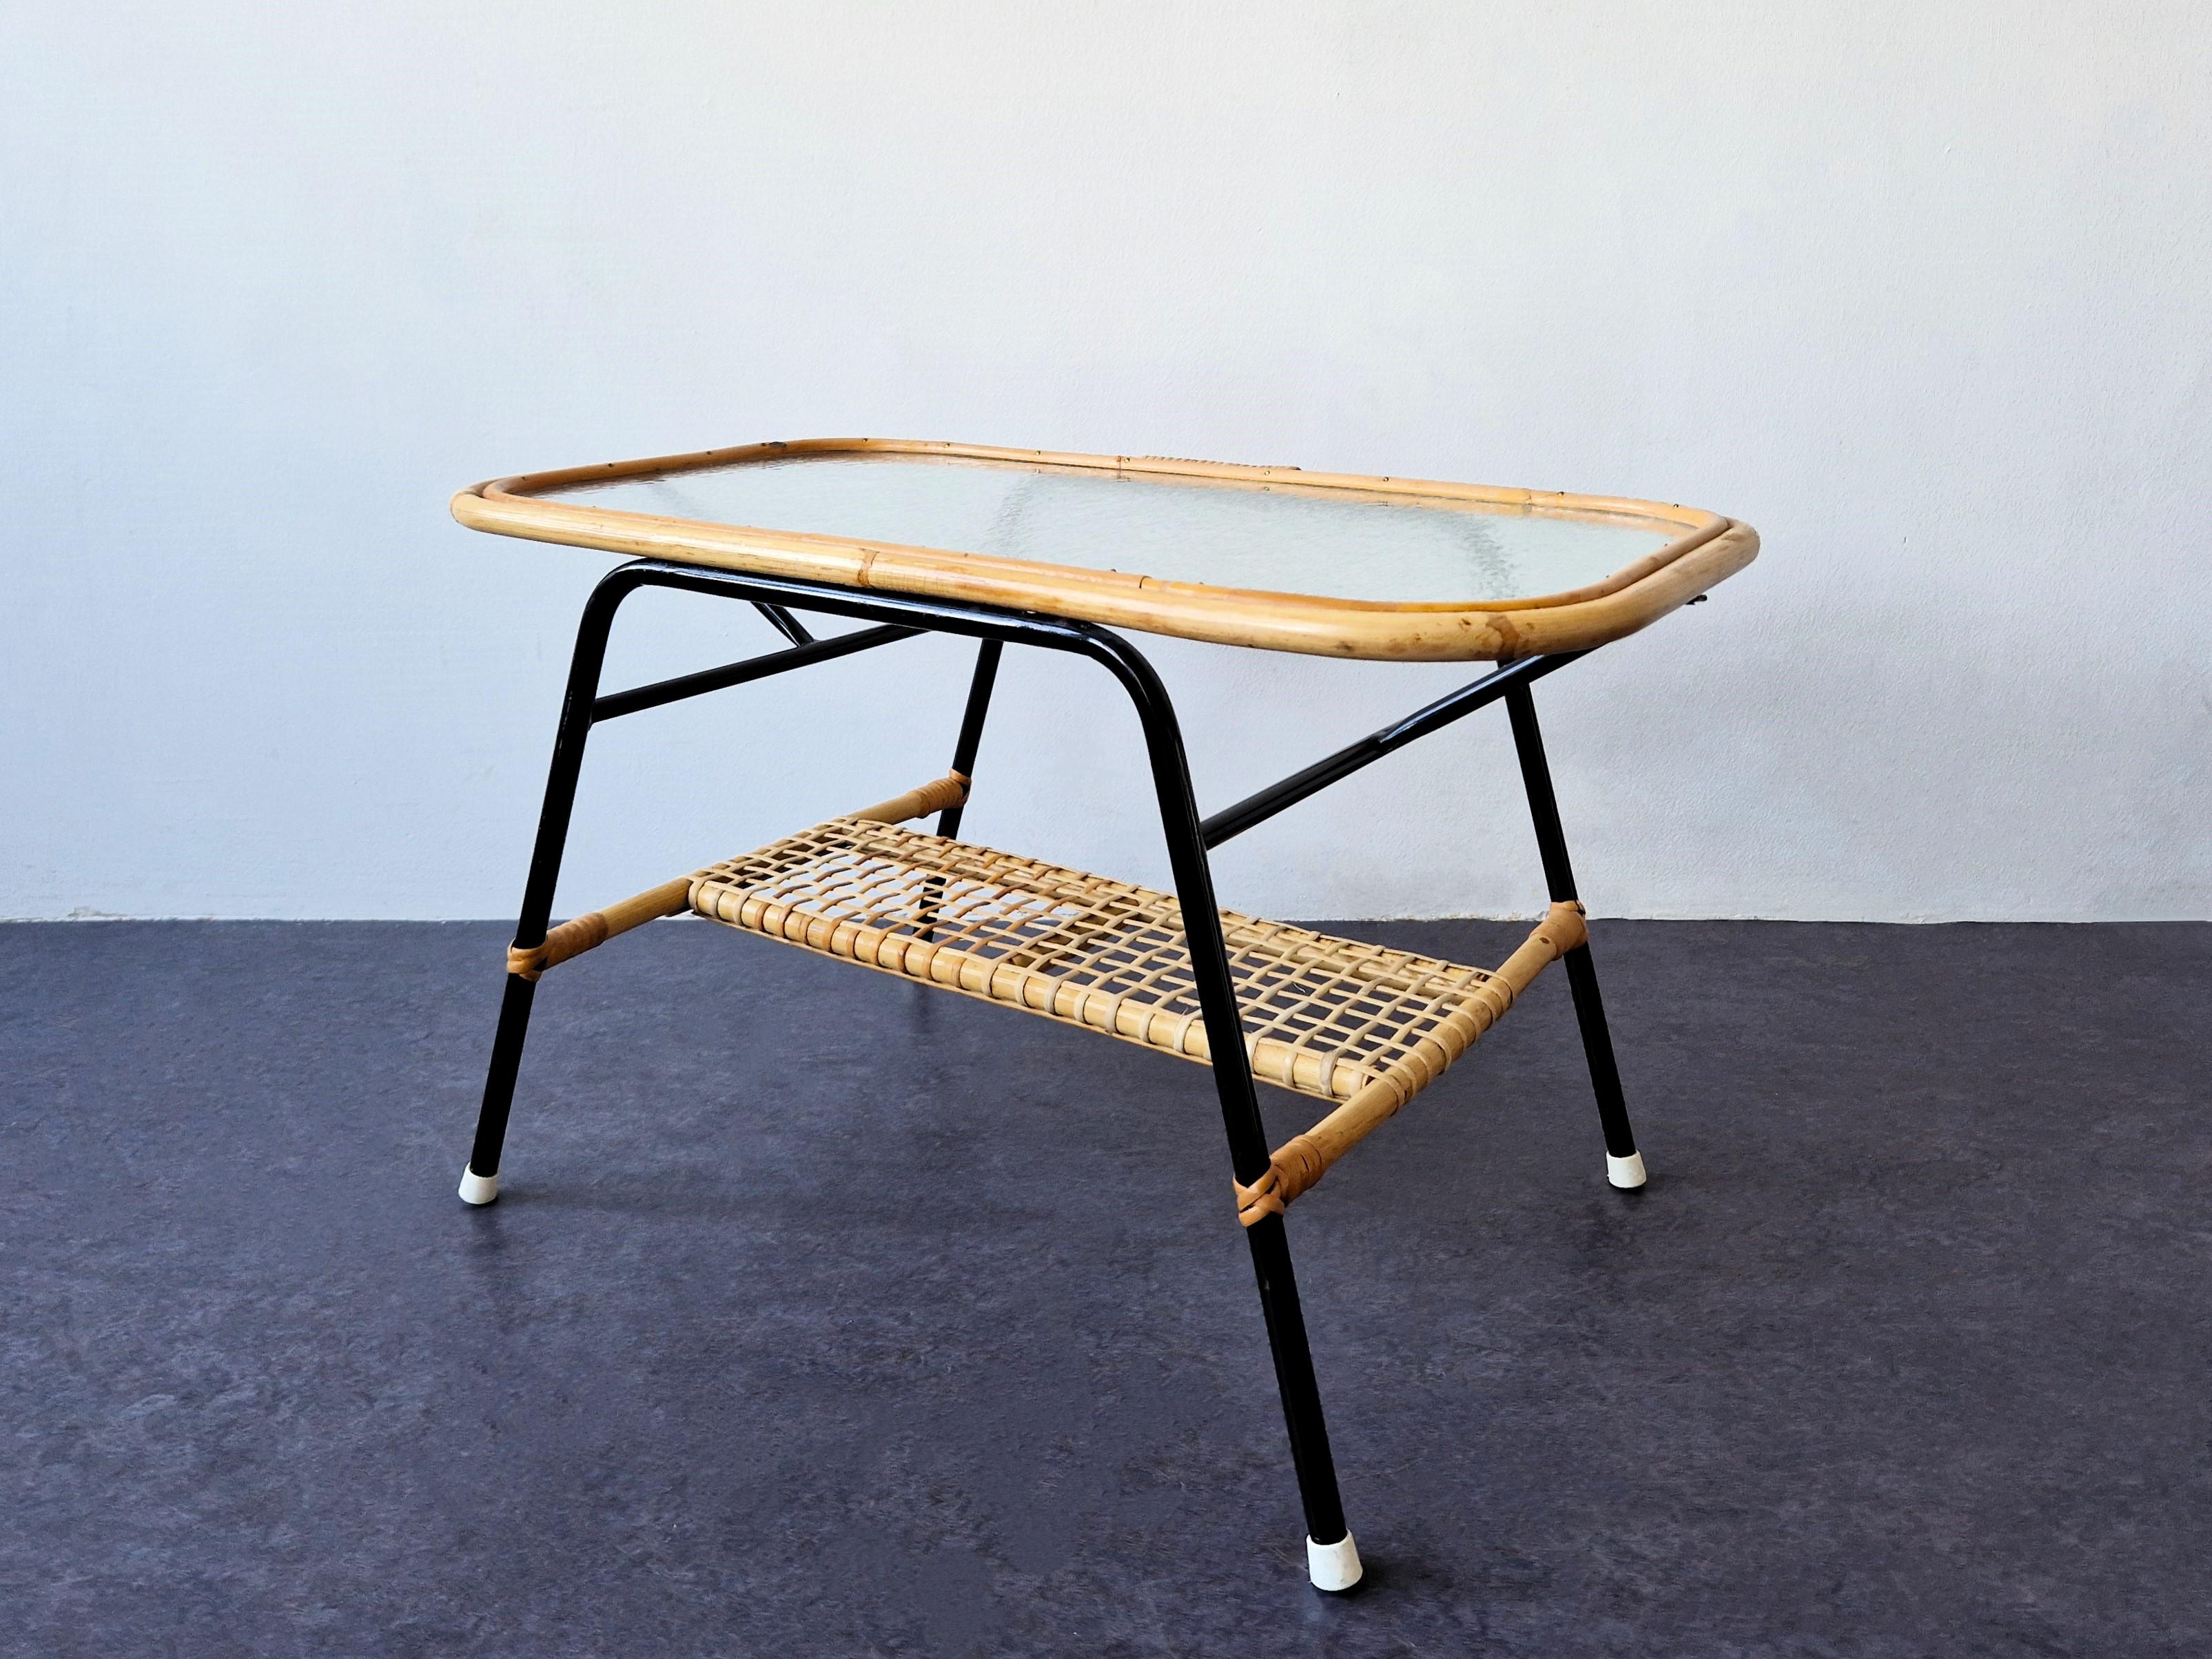 This coffee table was designed for Rohé Noordwolde in The Netherlands in the 1950's. The table has a black lacquered metal base with a rectangular rattan and cloud glass table top. The black laquered frame gives a nice contrast to the rattan. It has